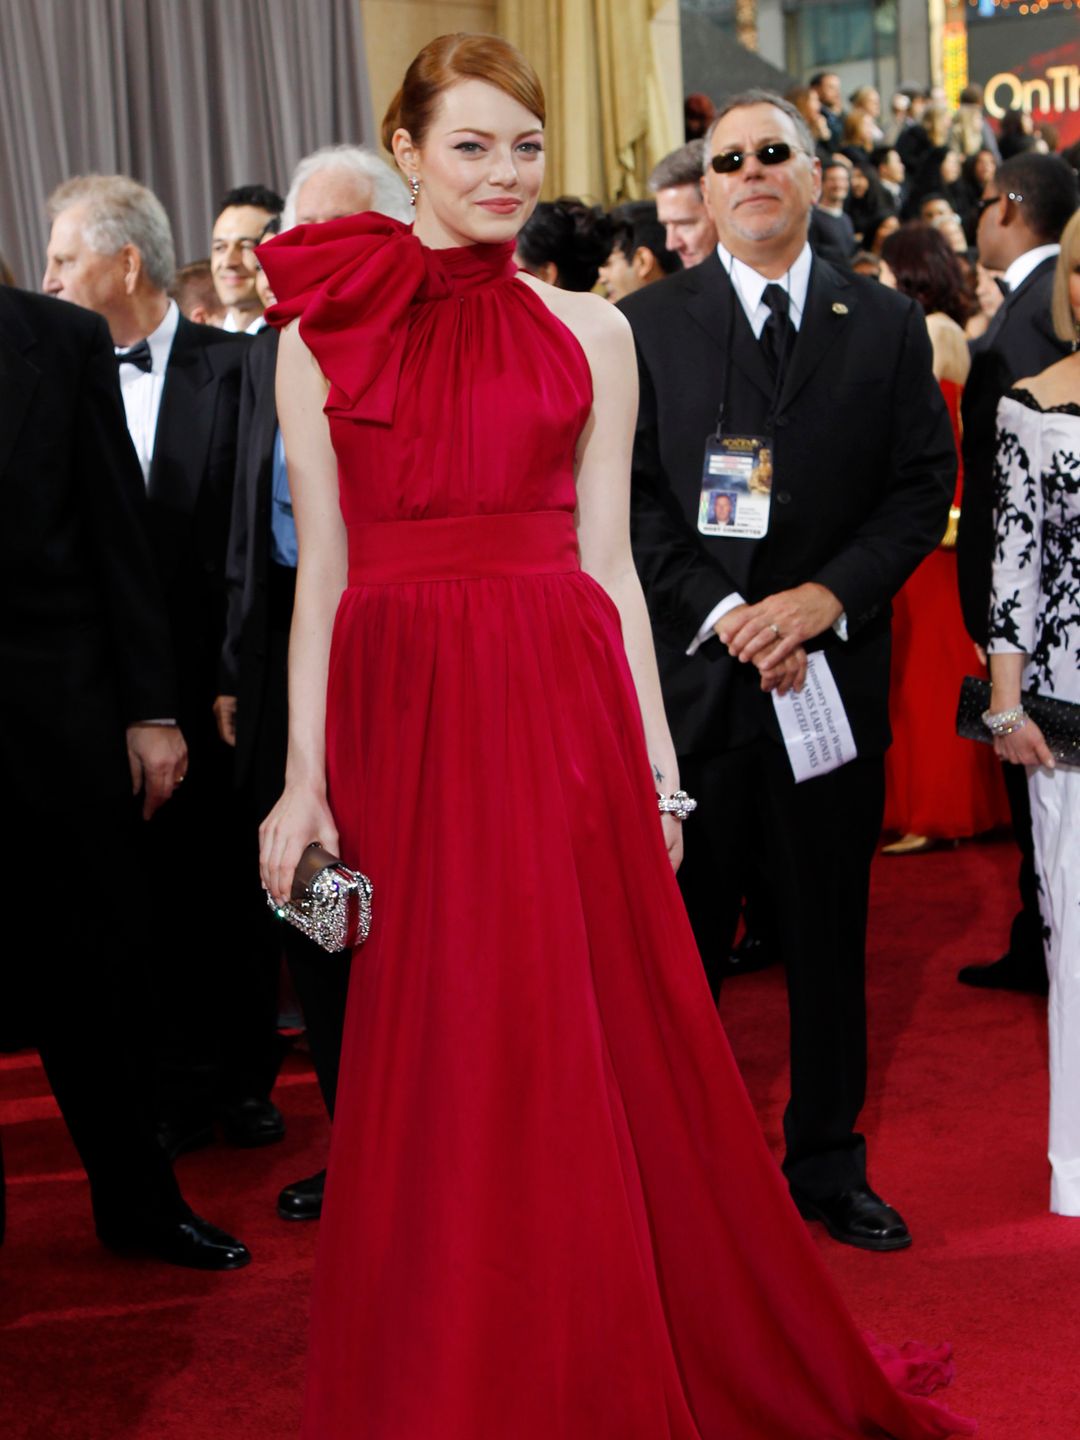  Emma Stone arrives at the 84th Annual Academy Awards in a bold red gown